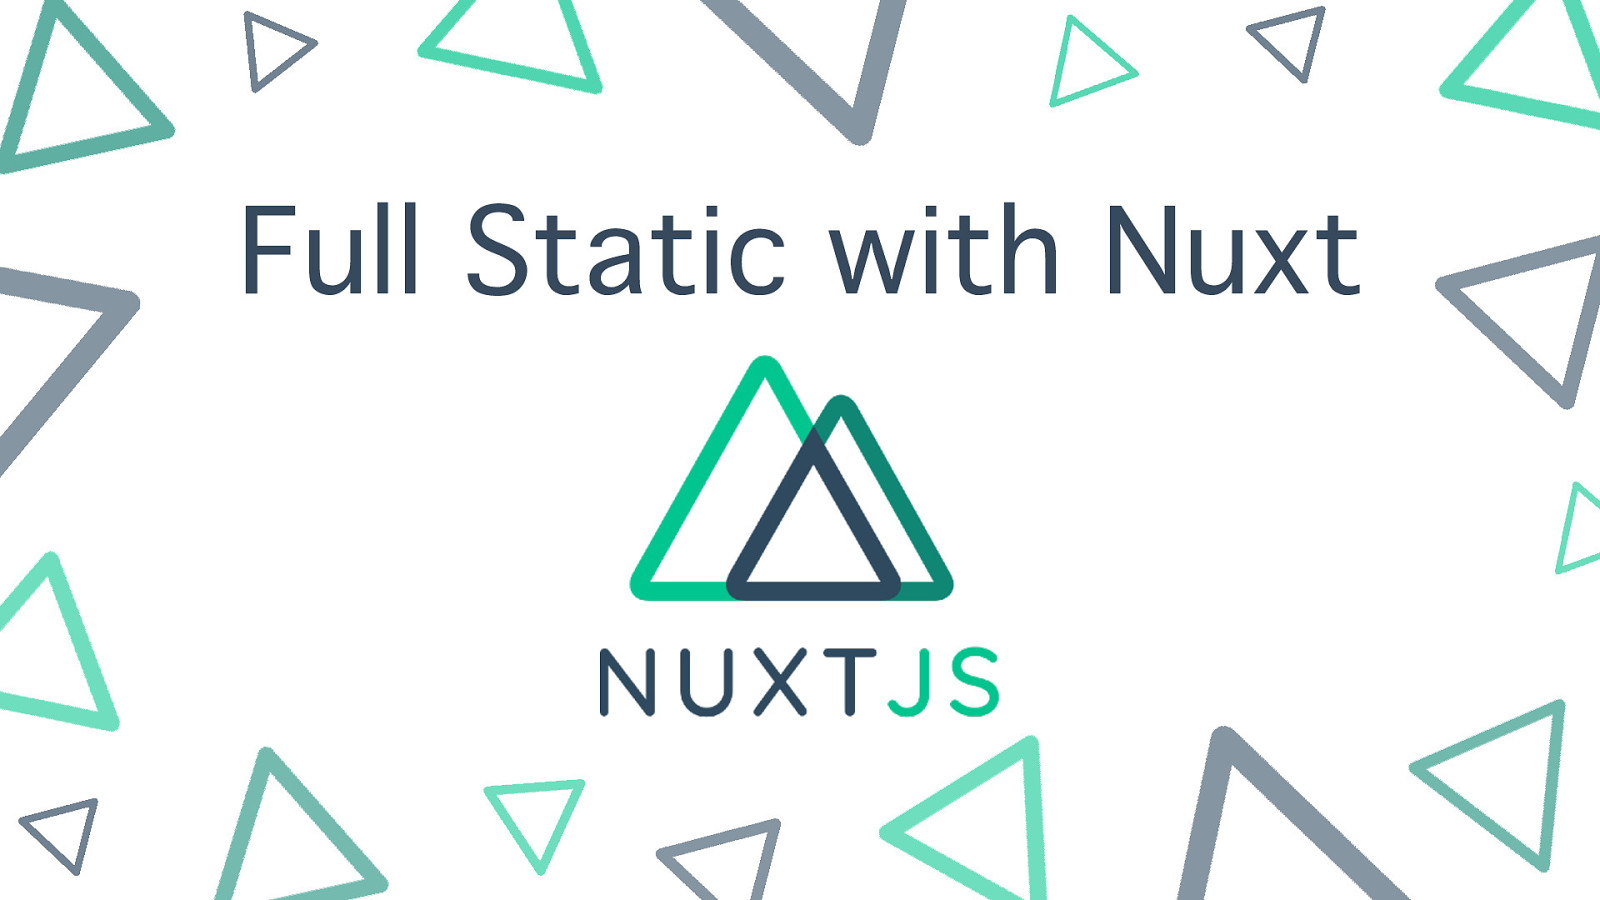 Full Static with Nuxt